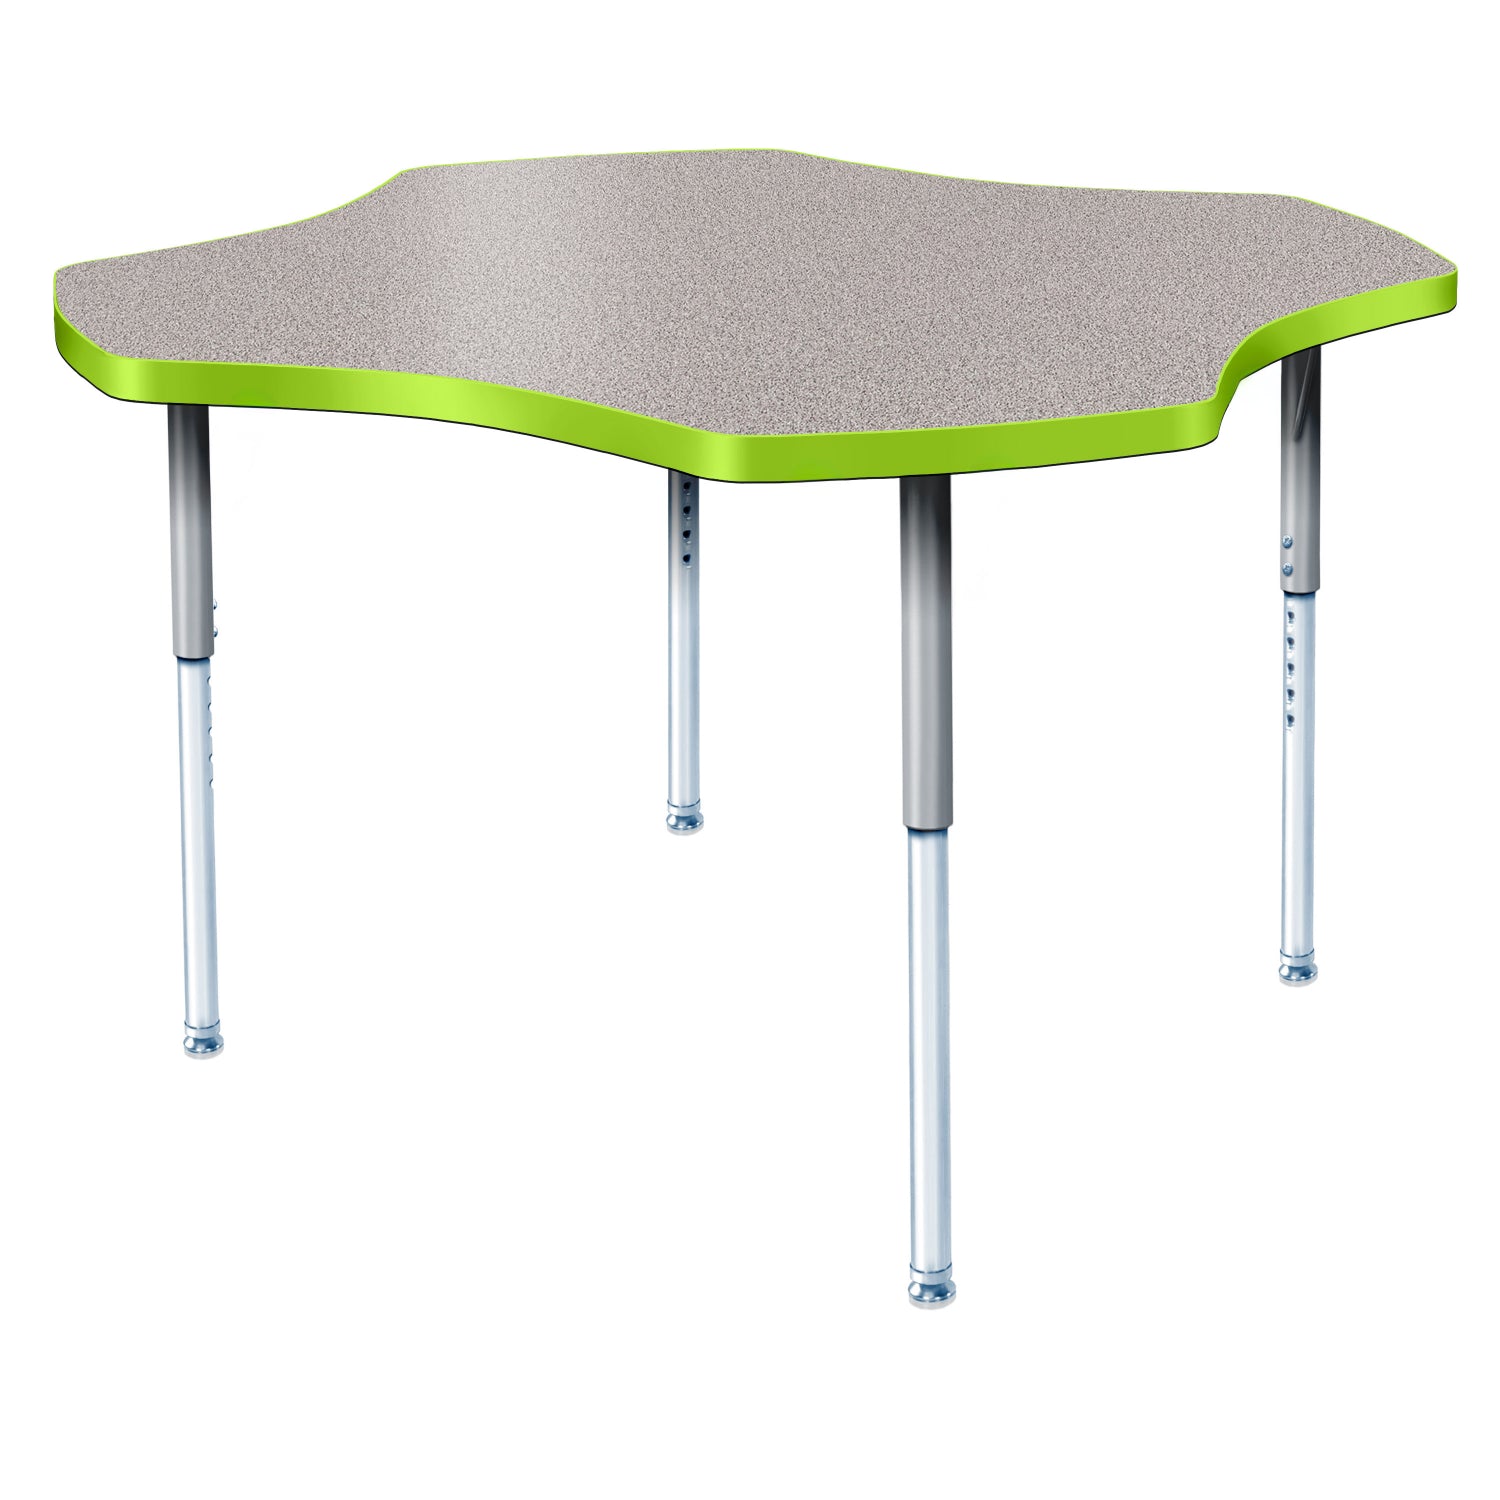 Modern Classic Series 48" Clover Activity Table with High Pressure Laminate Top, Adjustable Height Legs